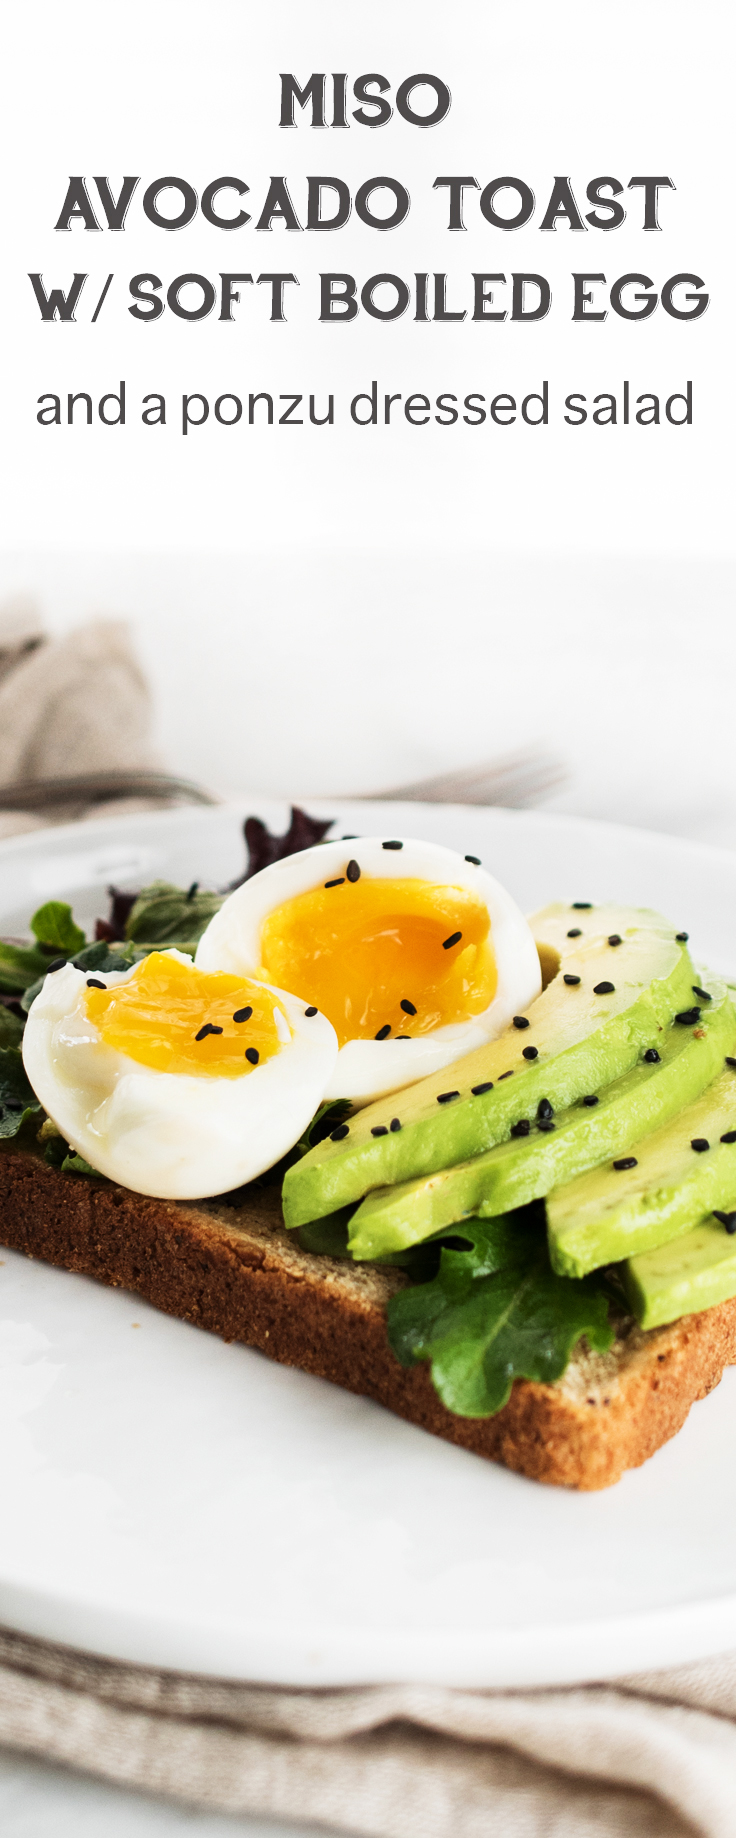 Got 10 minutes?! Miso Avocado Toast with Soft Boil Egg is the perfect quick and easy breakfast!